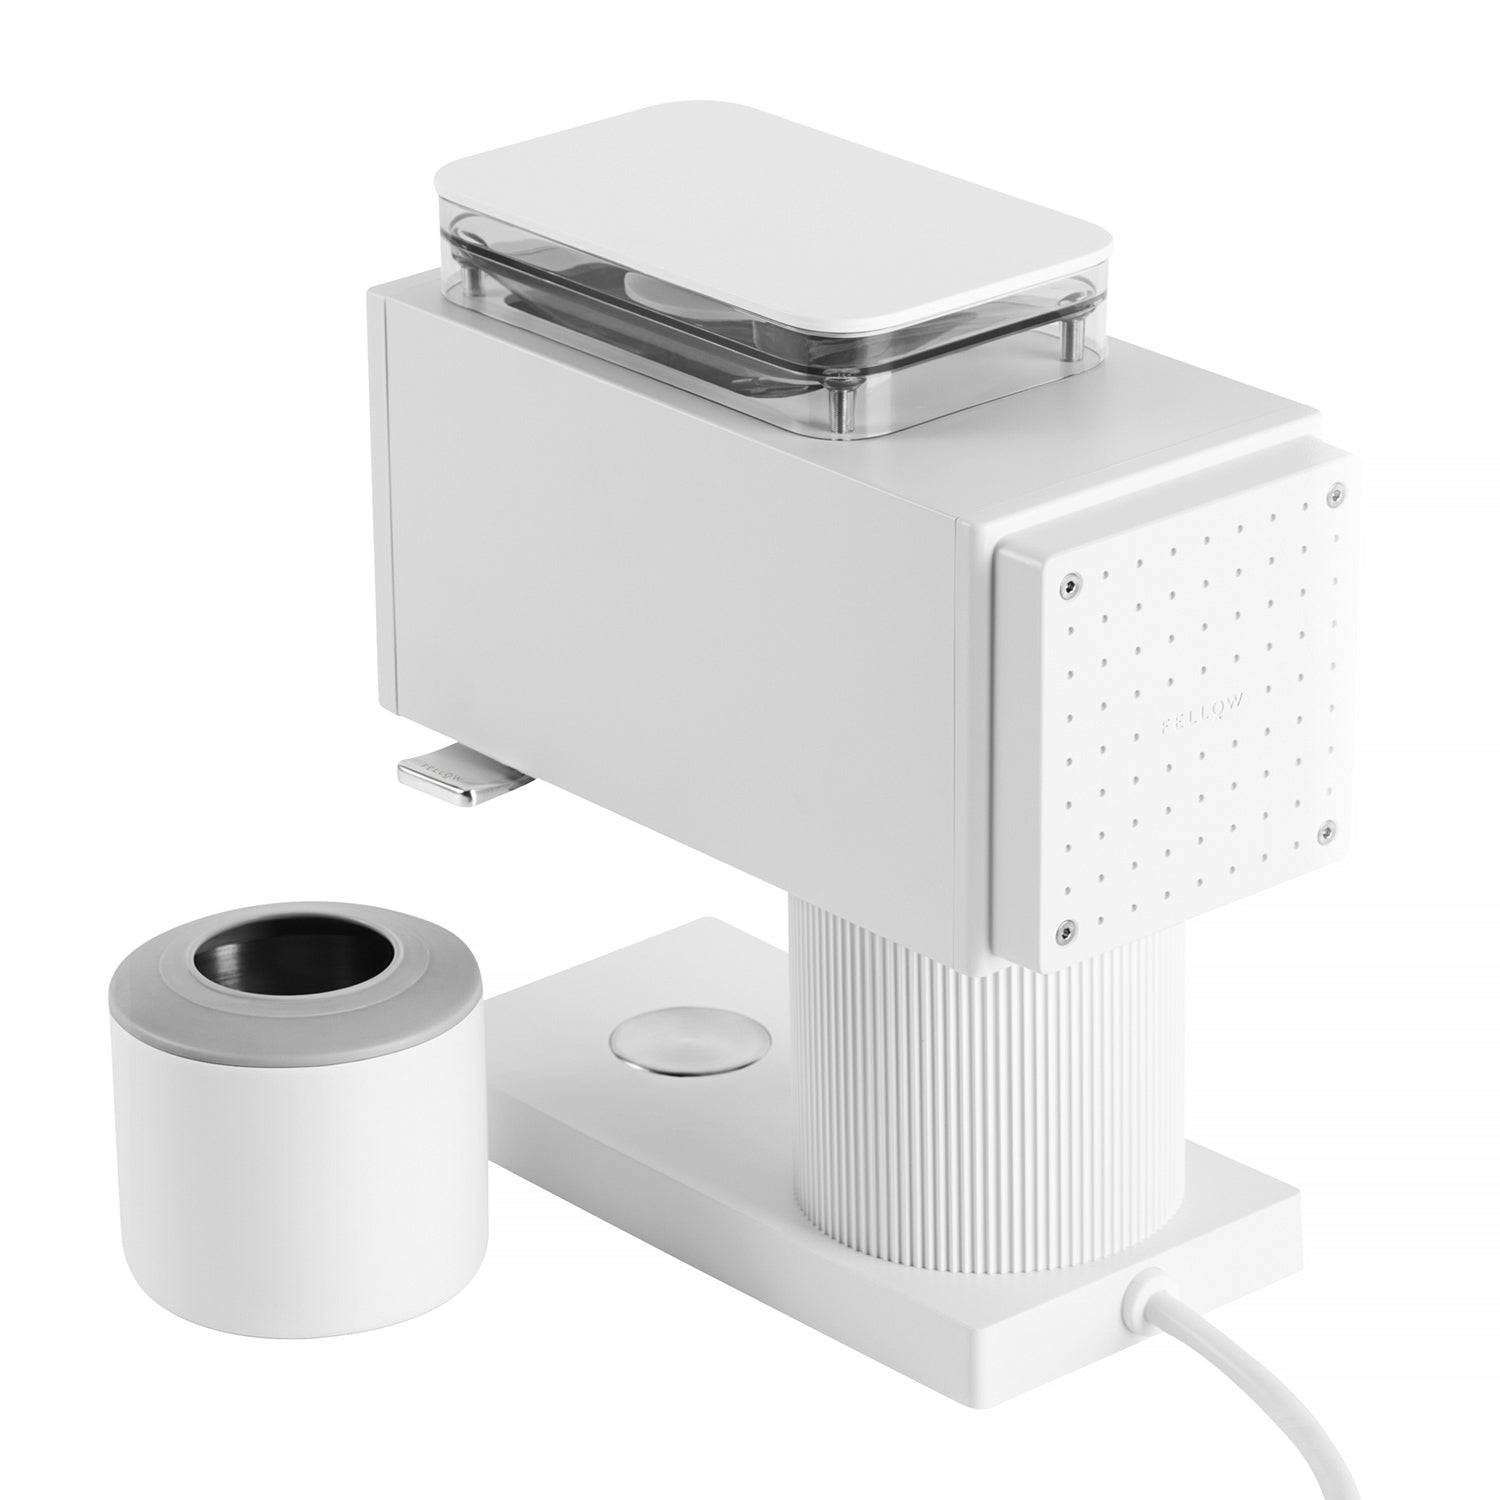 FELLOW ODE coffee grinder (White)